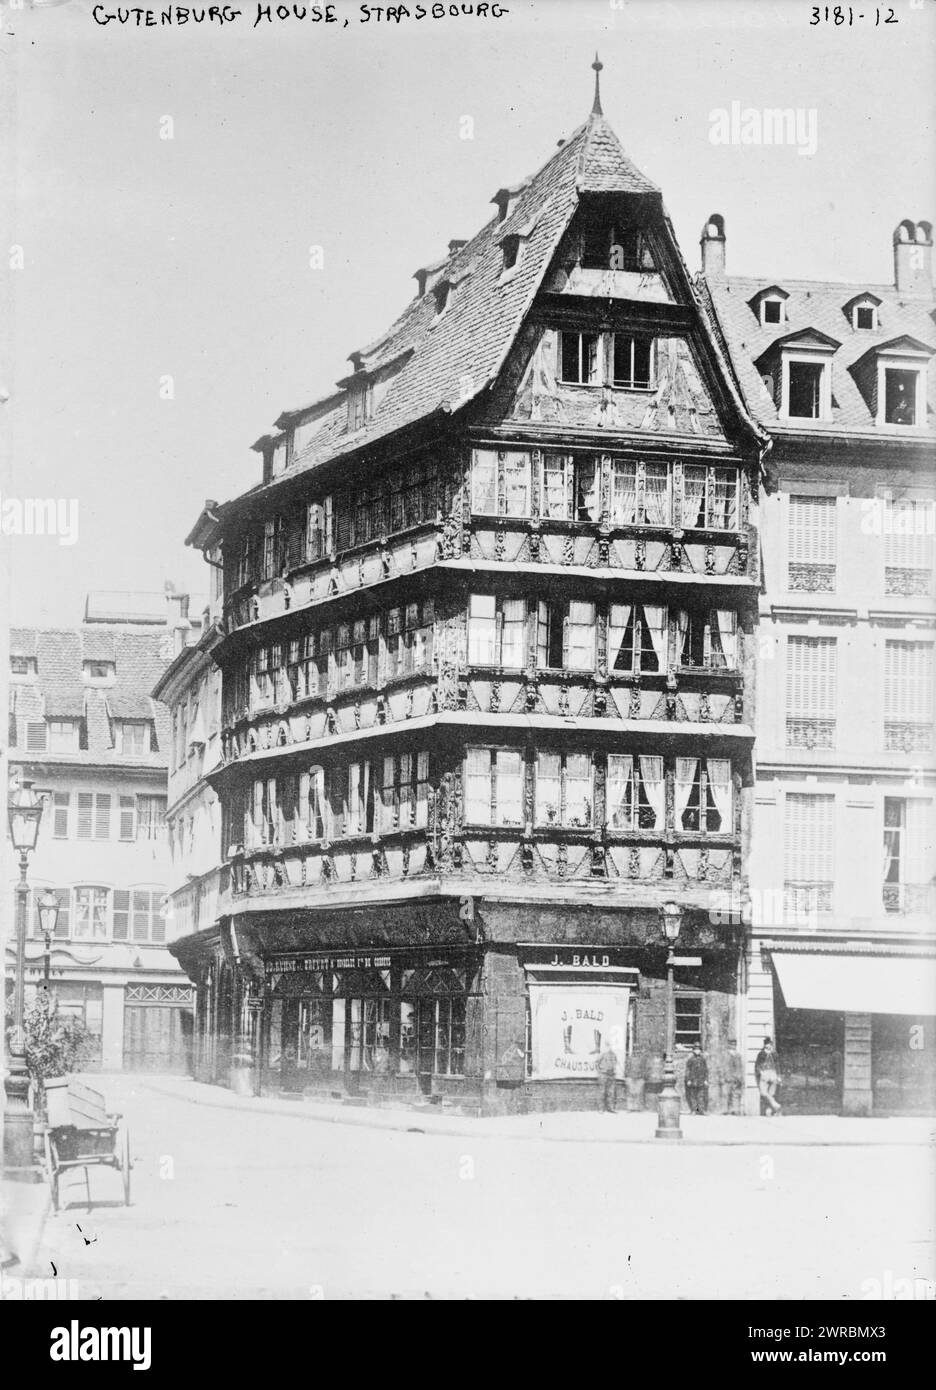 Guttenburg House i.e., Maison Kammerzell, Strasbourg, Photograph shows the Maison Kammerzell also known as the Altes Haus and Maison Vielle, Strasbourg, France. The house has no connection to Johannes Gutenberg., between ca. 1910 and ca. 1915, Strasbourg, Glass negatives, 1 negative: glass Stock Photo